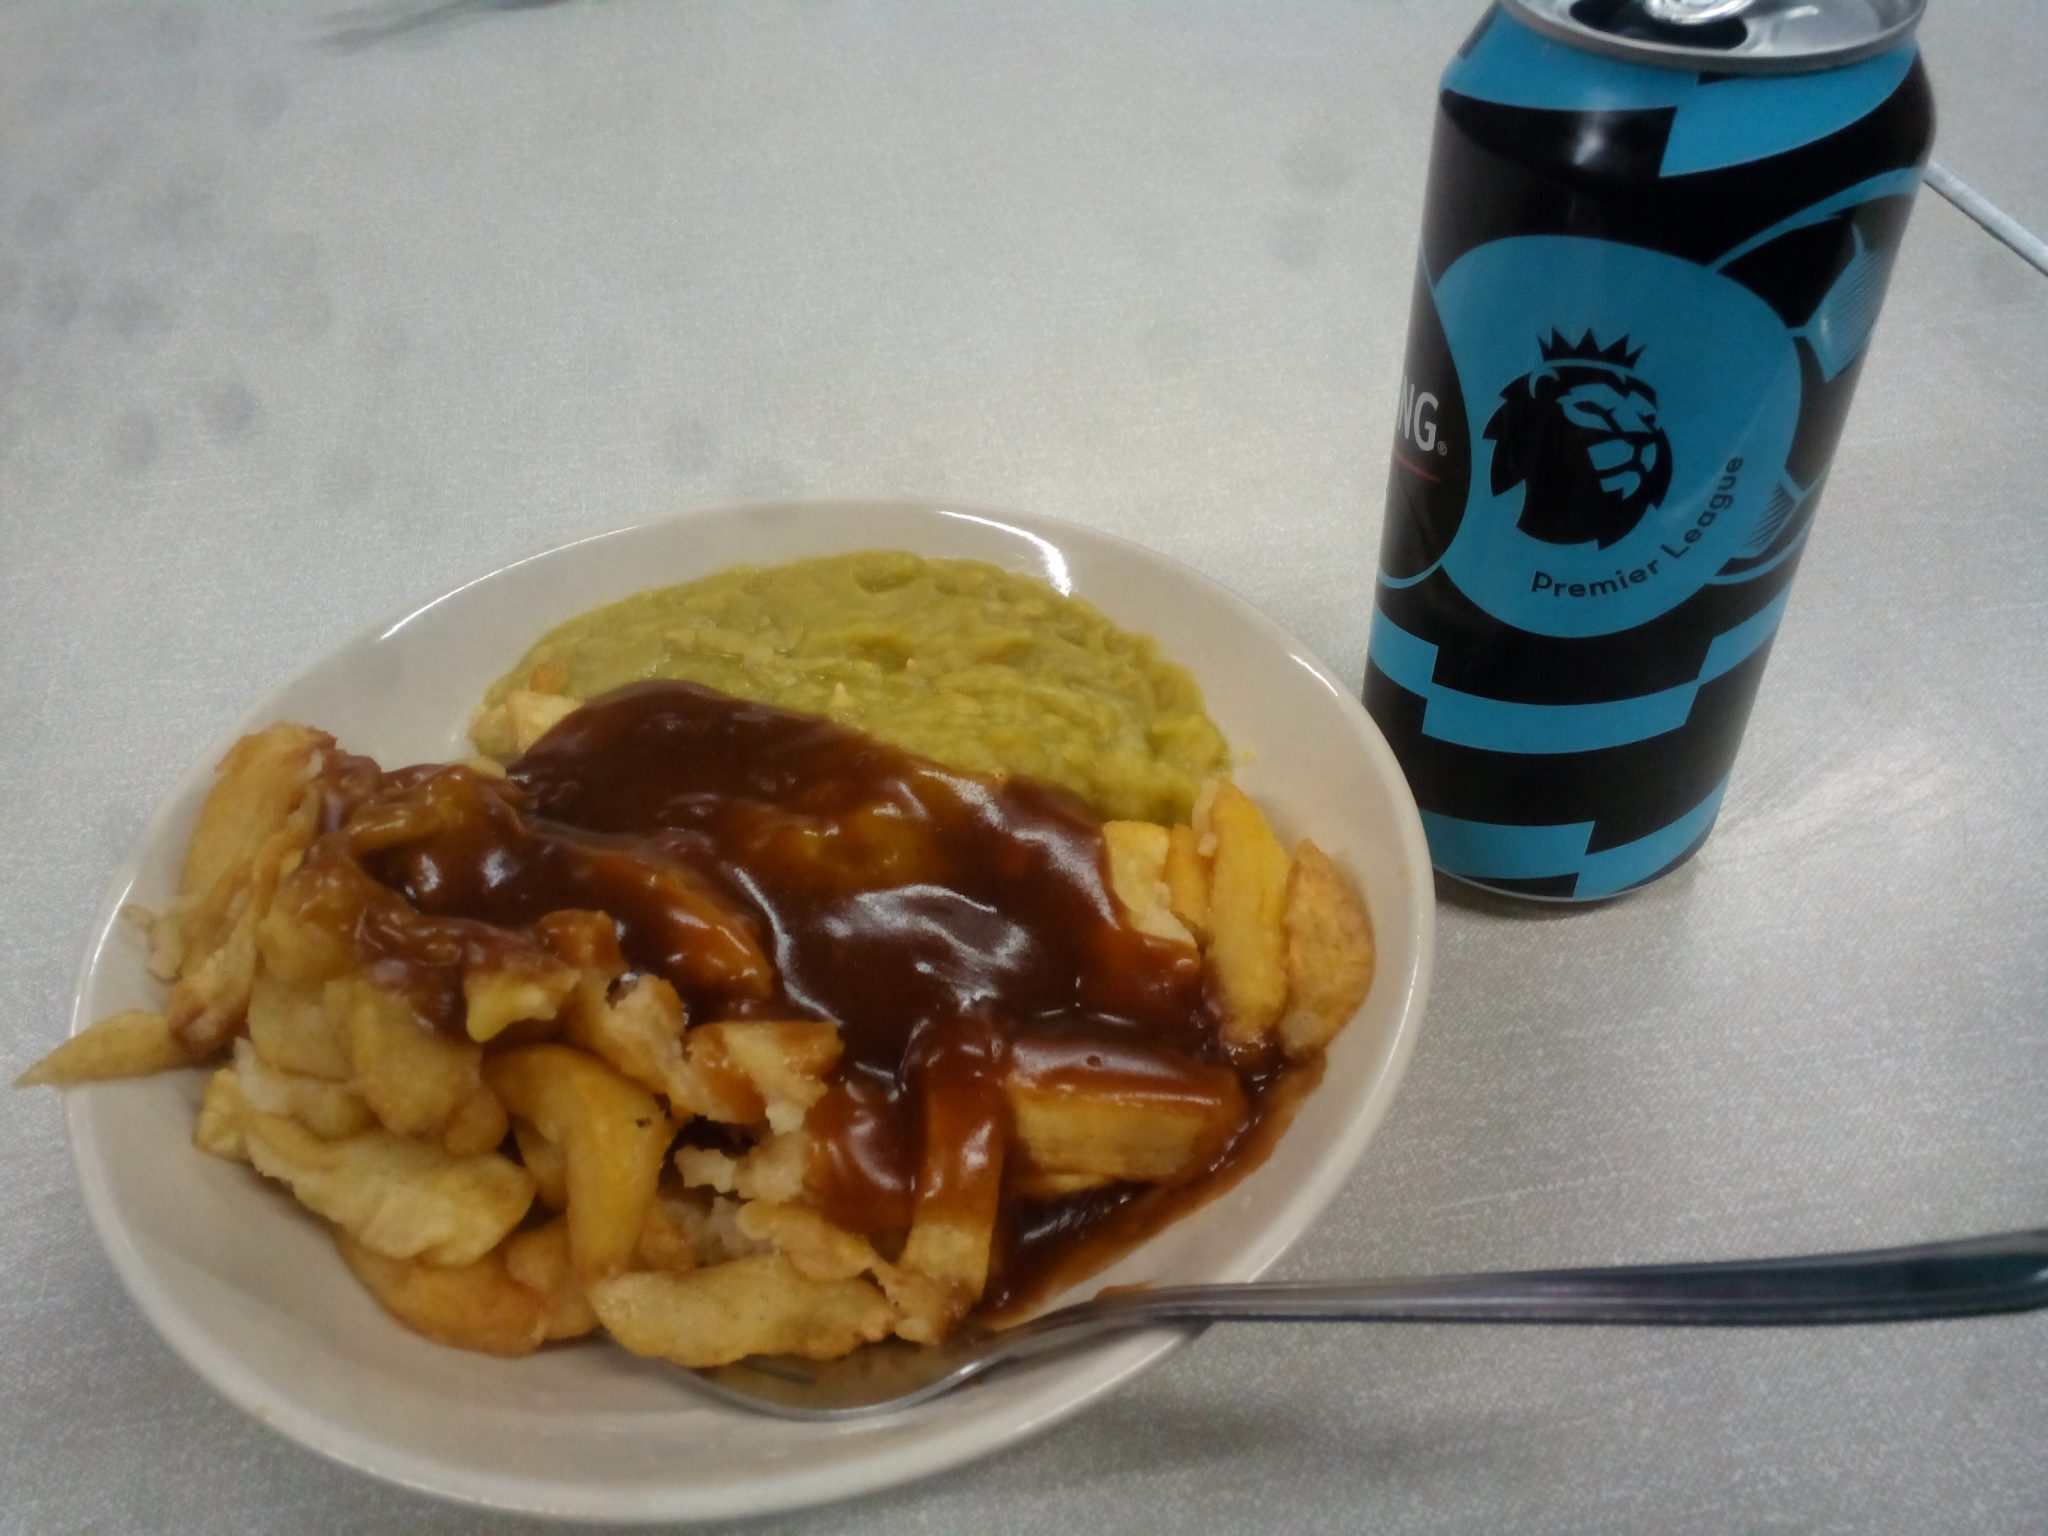 Manchester specialty, chips, mushy pies and gravy - yummy scrummy!